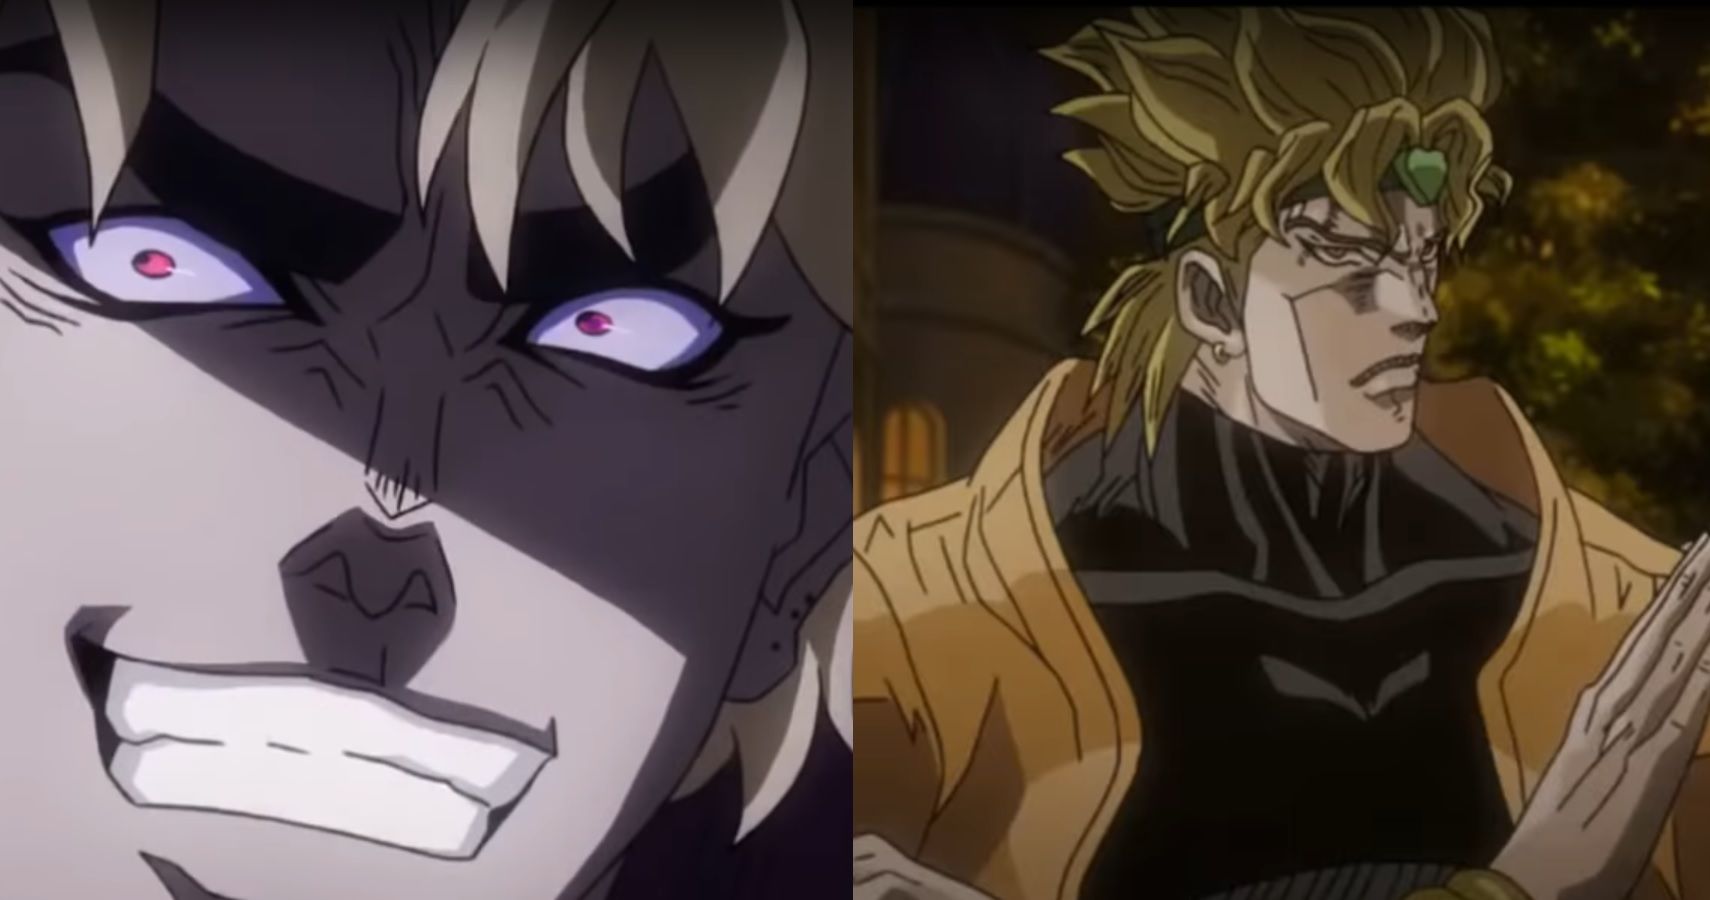 In JoJo's Bizarre Adventures, how does Dio with The World fare in